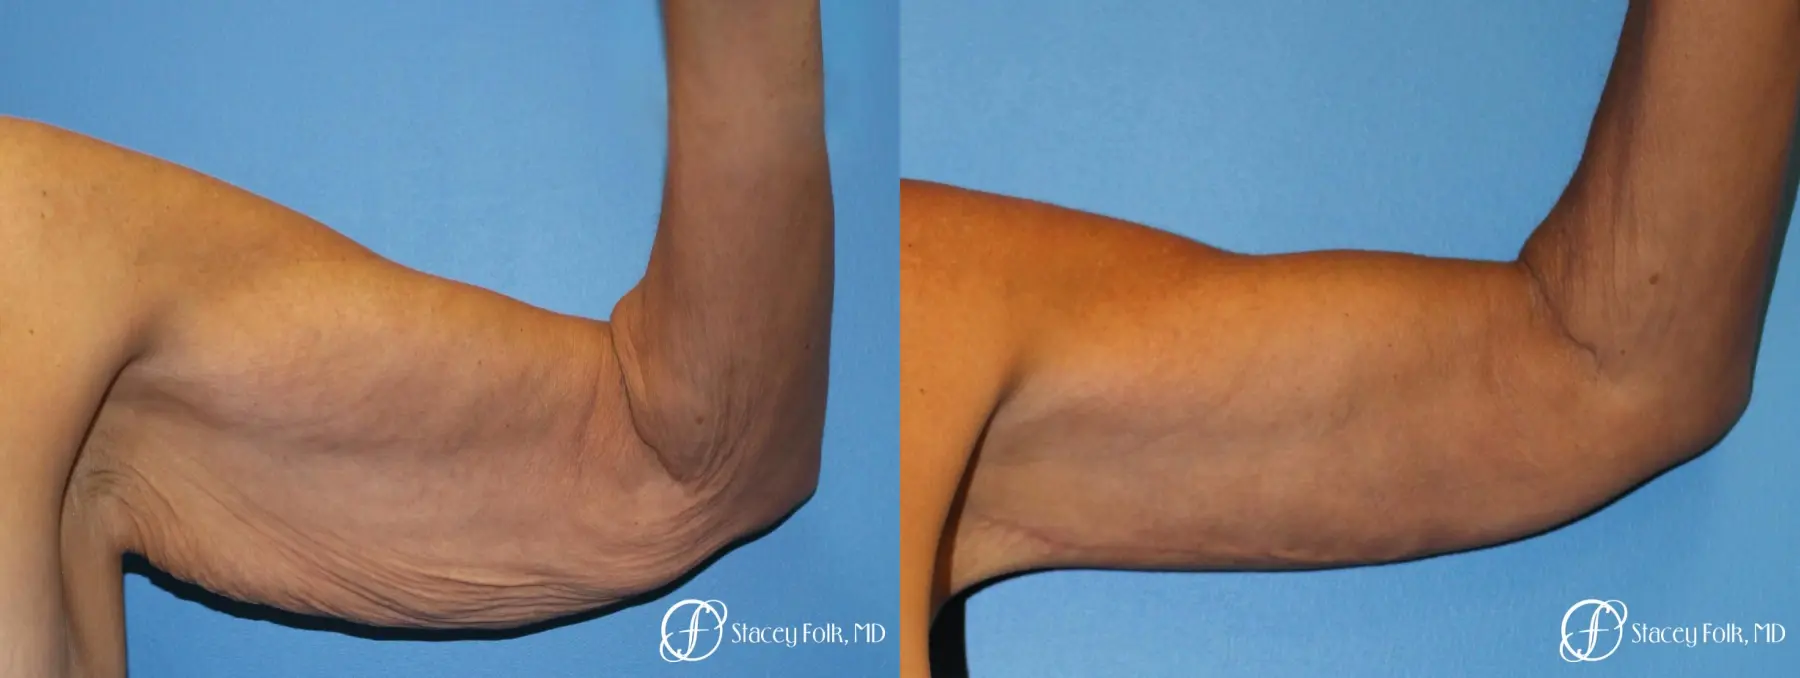 Denver Brachioplasty 8457 - Before and After